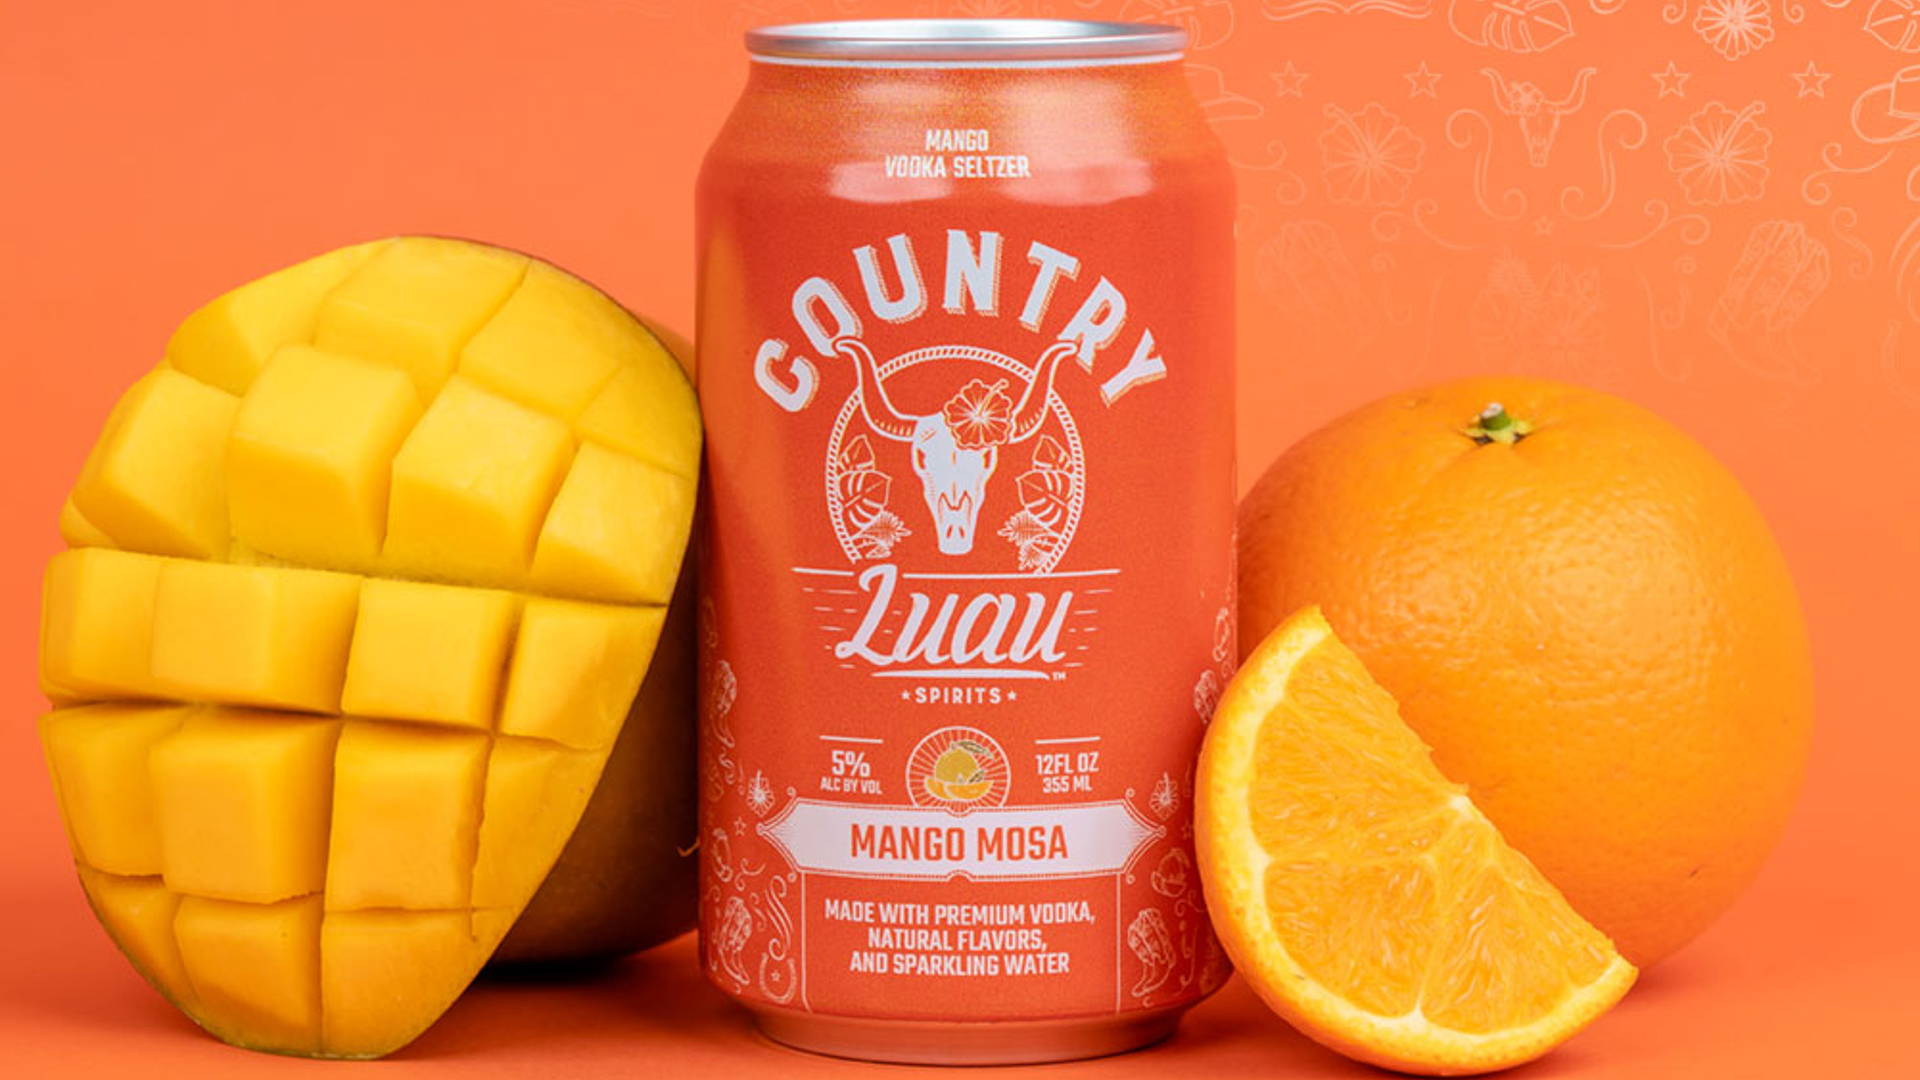 Featured image for Country Luau Is A Purpose-Driven Line Of Ready-To-Drink Cocktail Seltzers Made With Premium Spirits